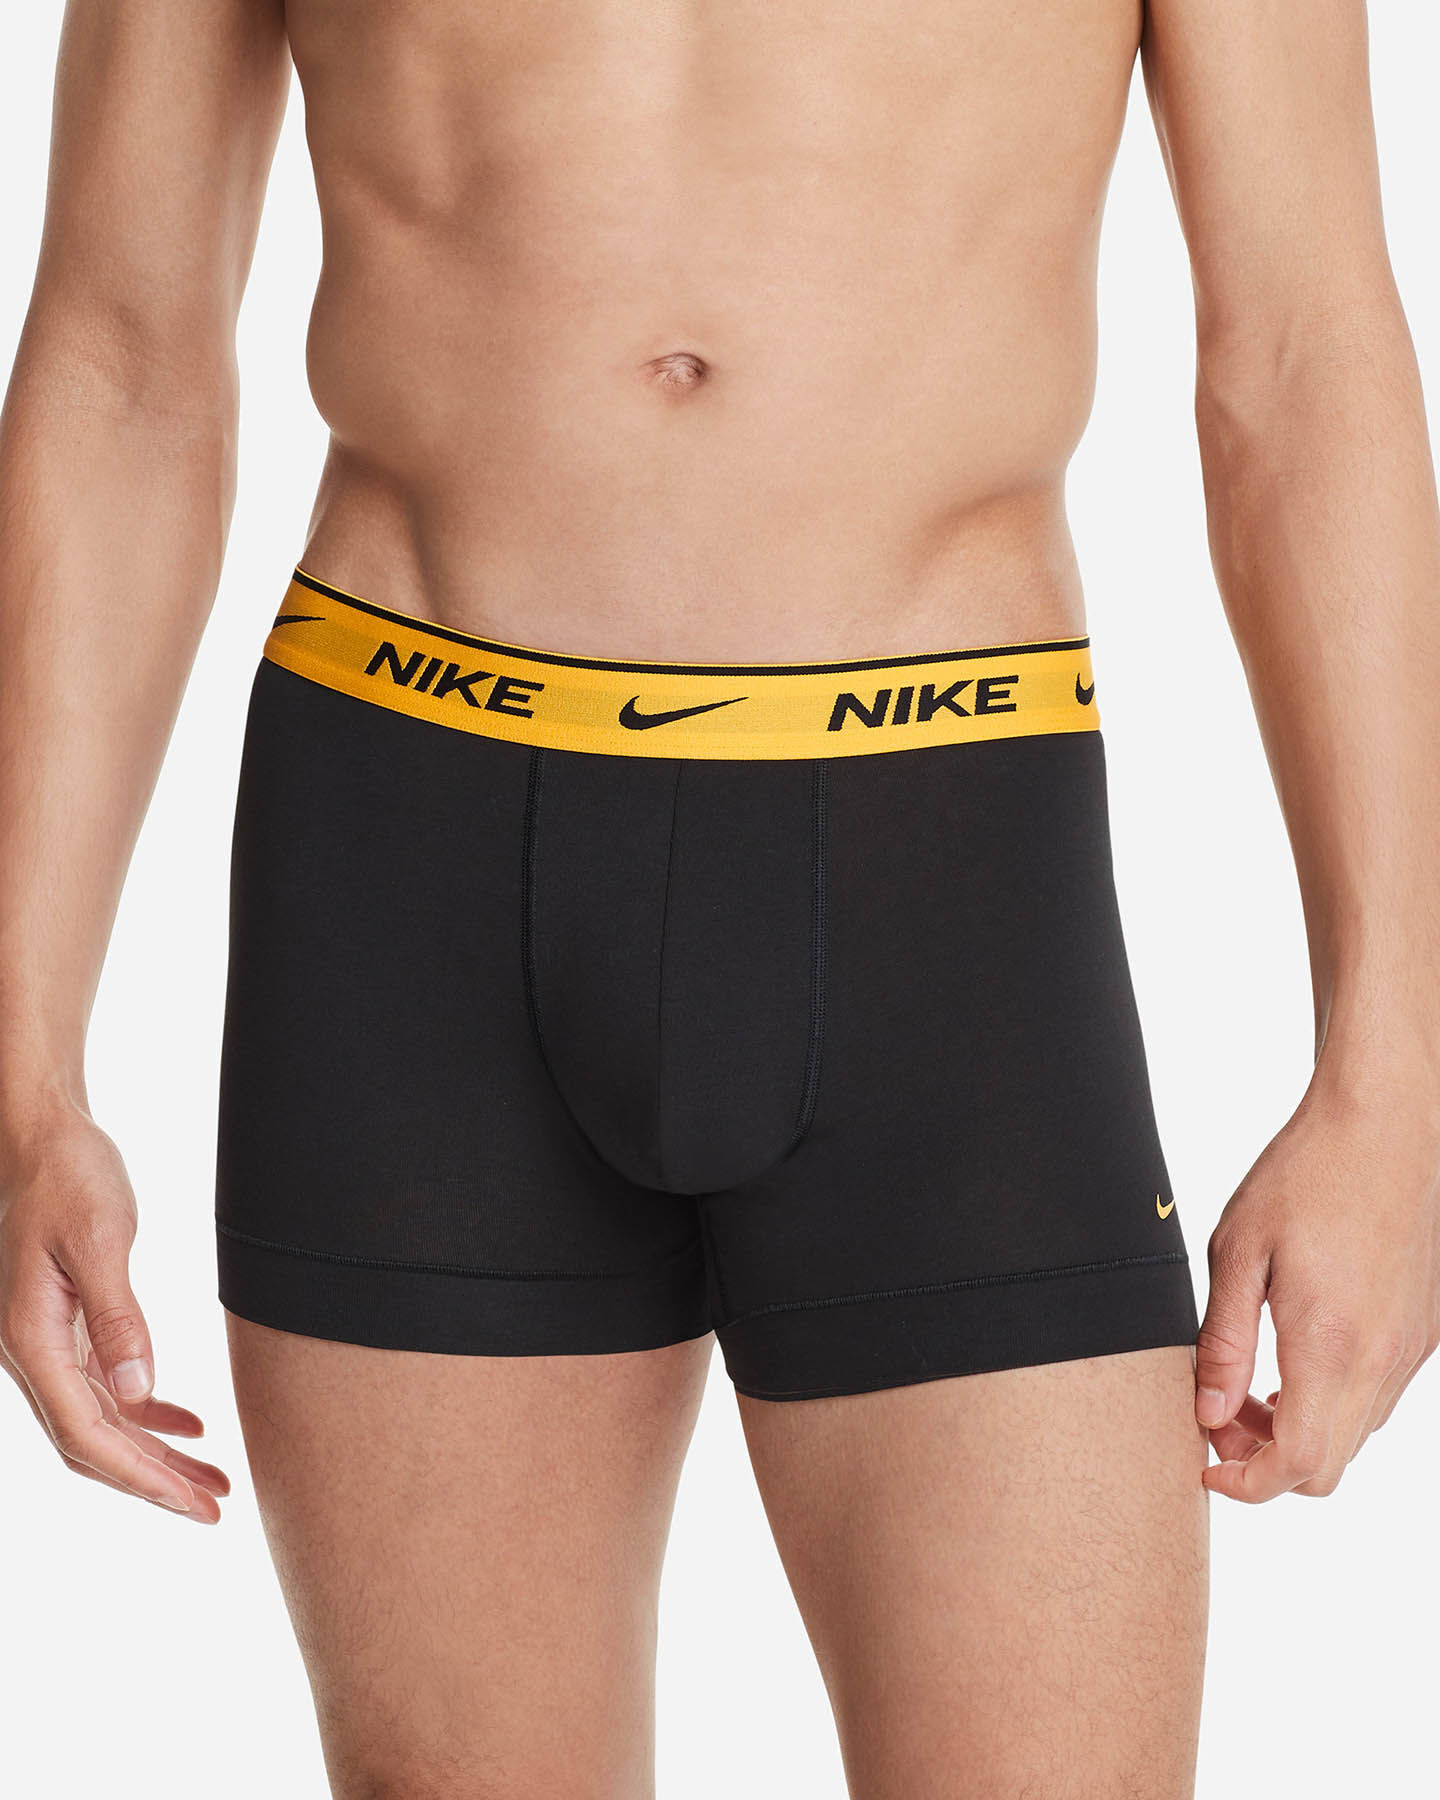  Intimo NIKE 3PACK BOXER EVERYDAY M S4099884|M1R|XL scatto 1